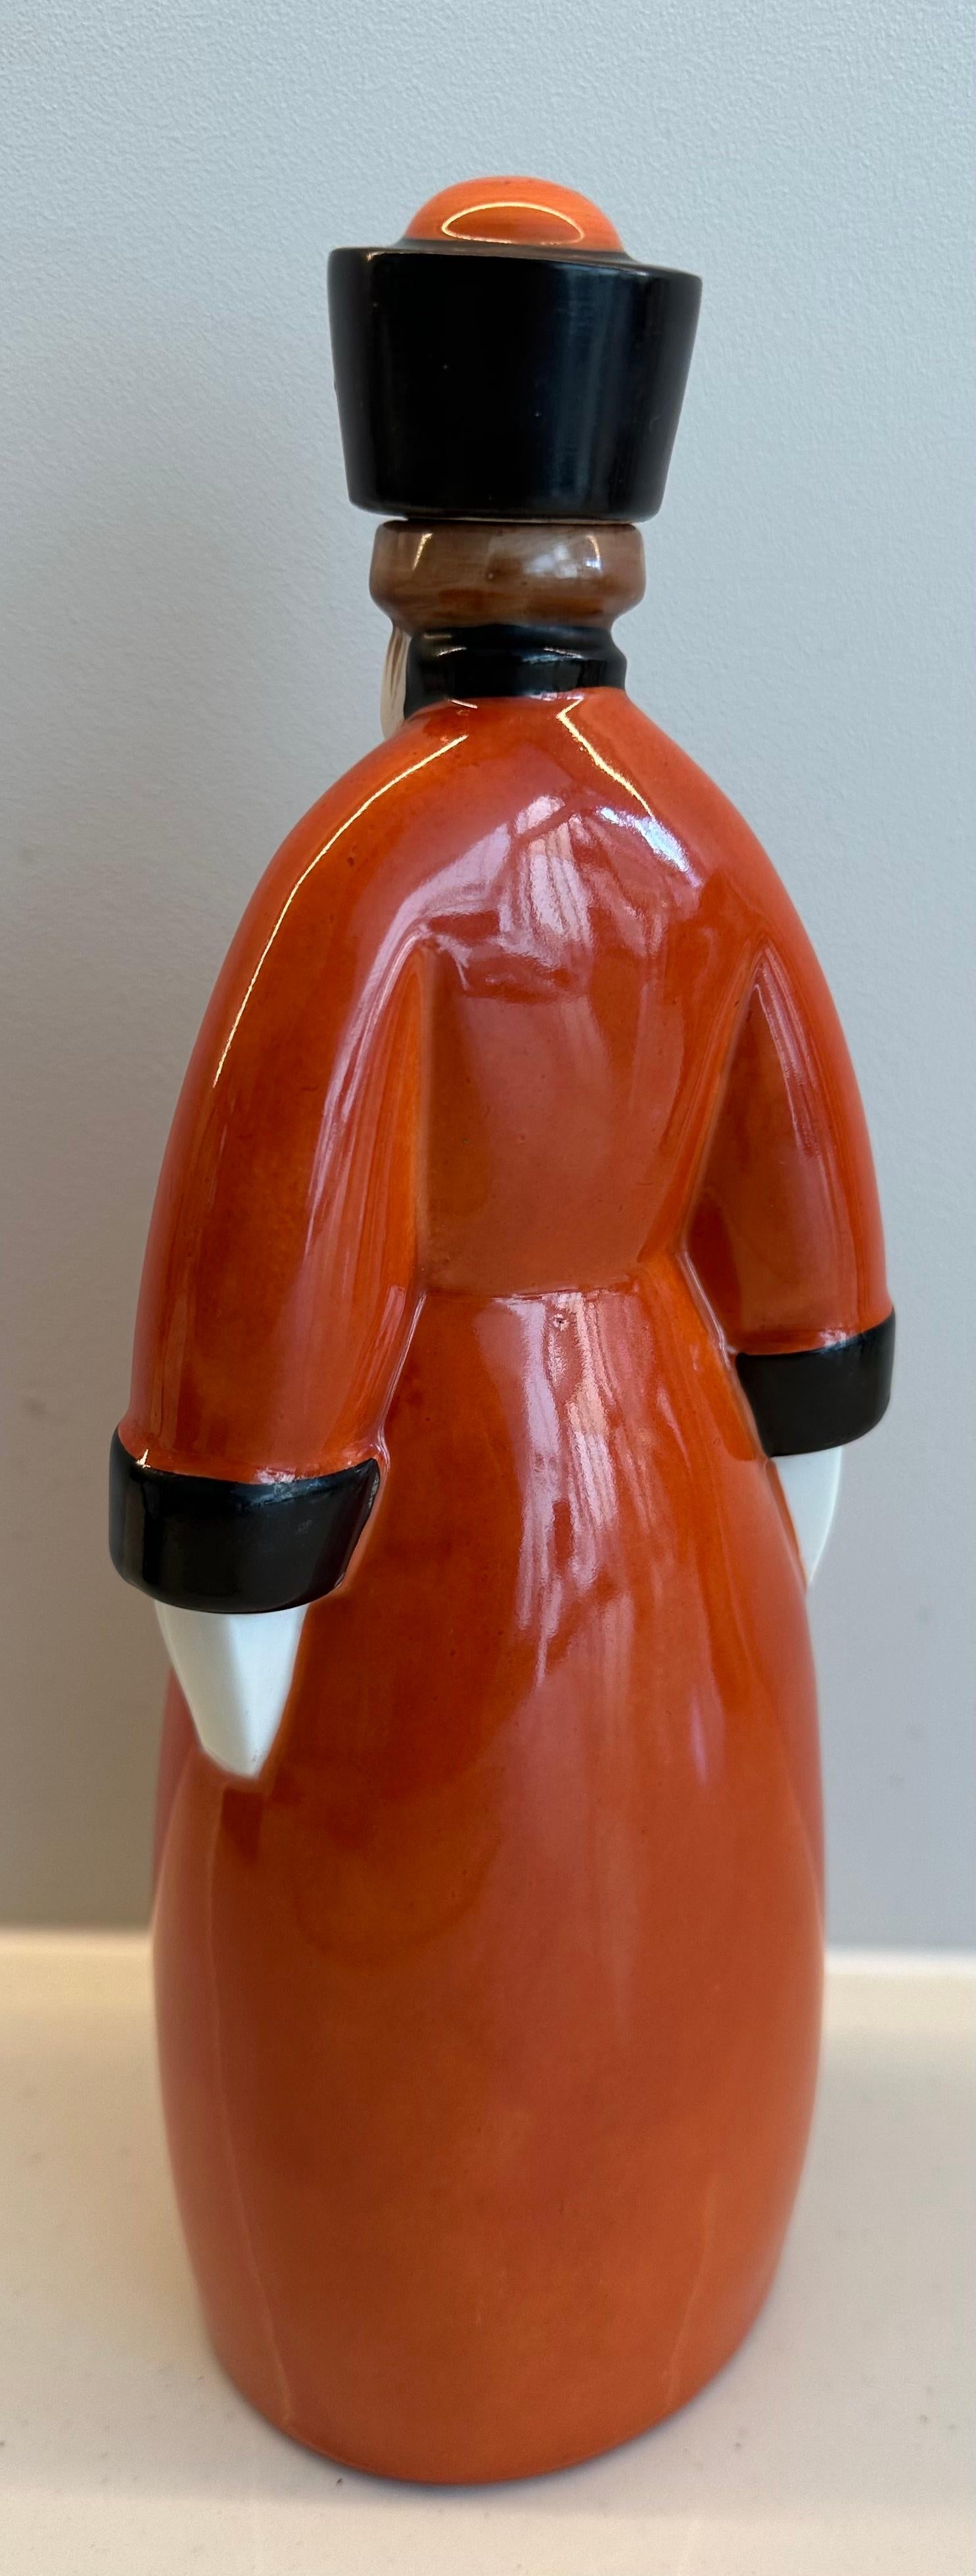 Ceramic Art Deco 1930s French “Curacao” Figural Russian Soldier Flask by Robj Paris For Sale